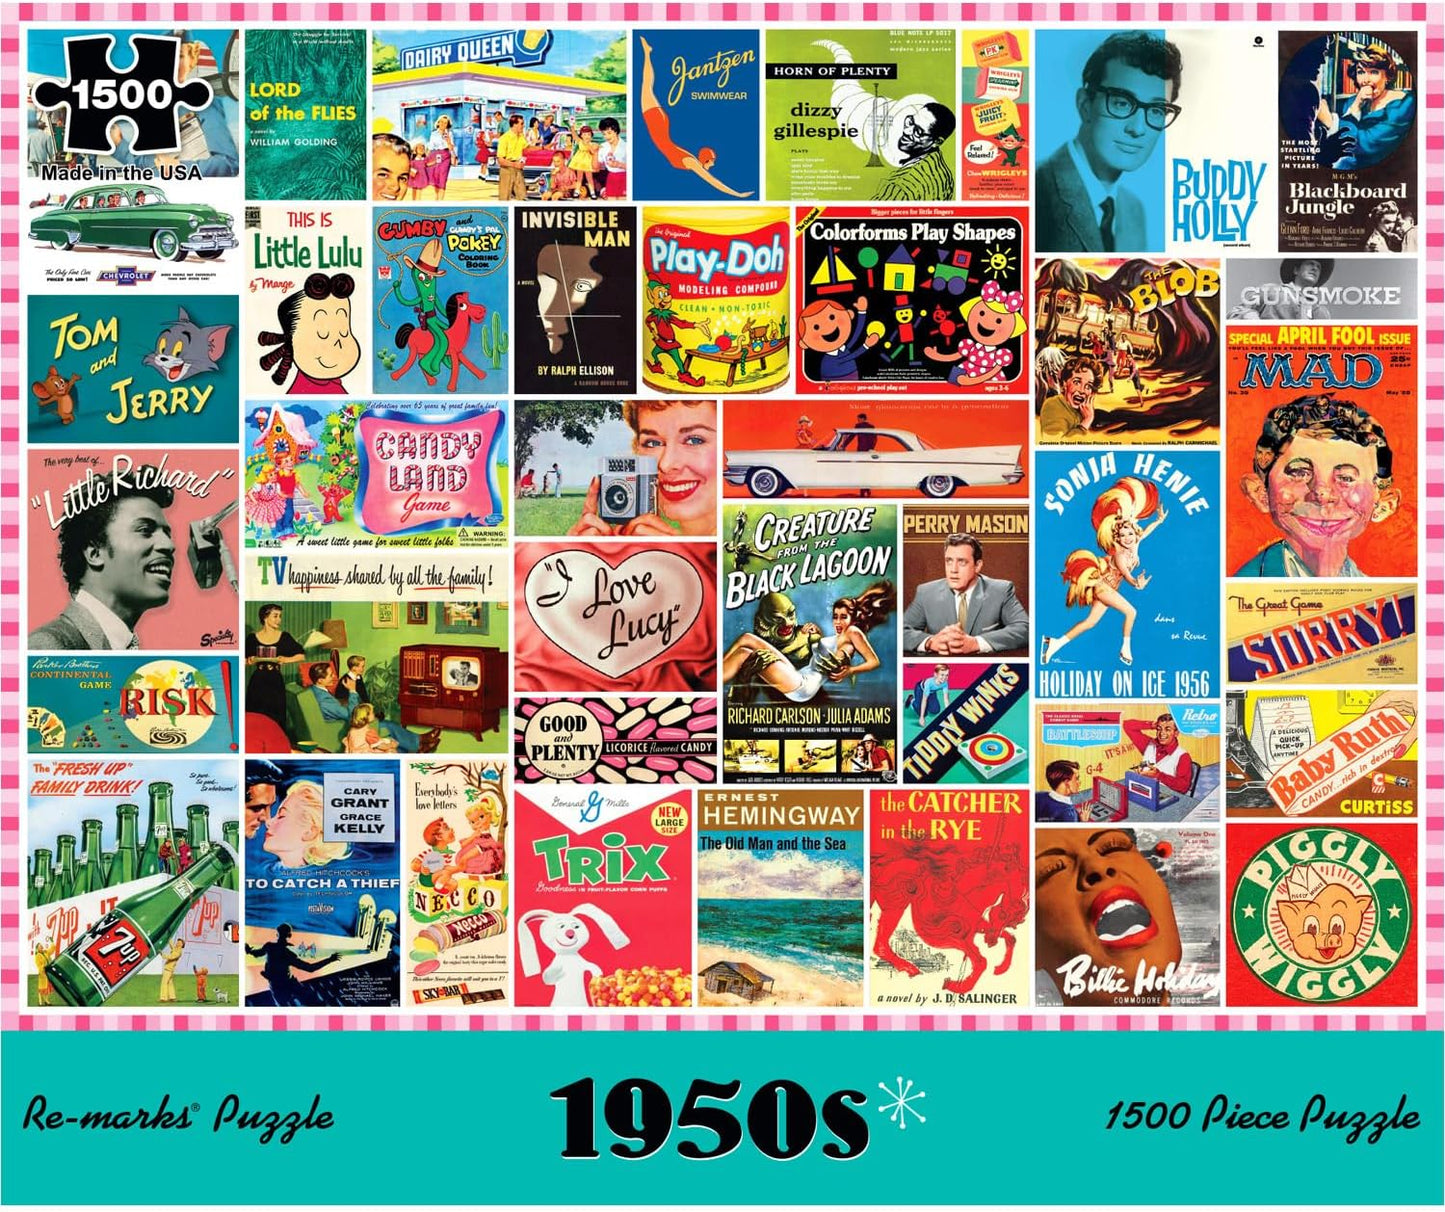 1950s Collage 1500-Piece Jigsaw Puzzle